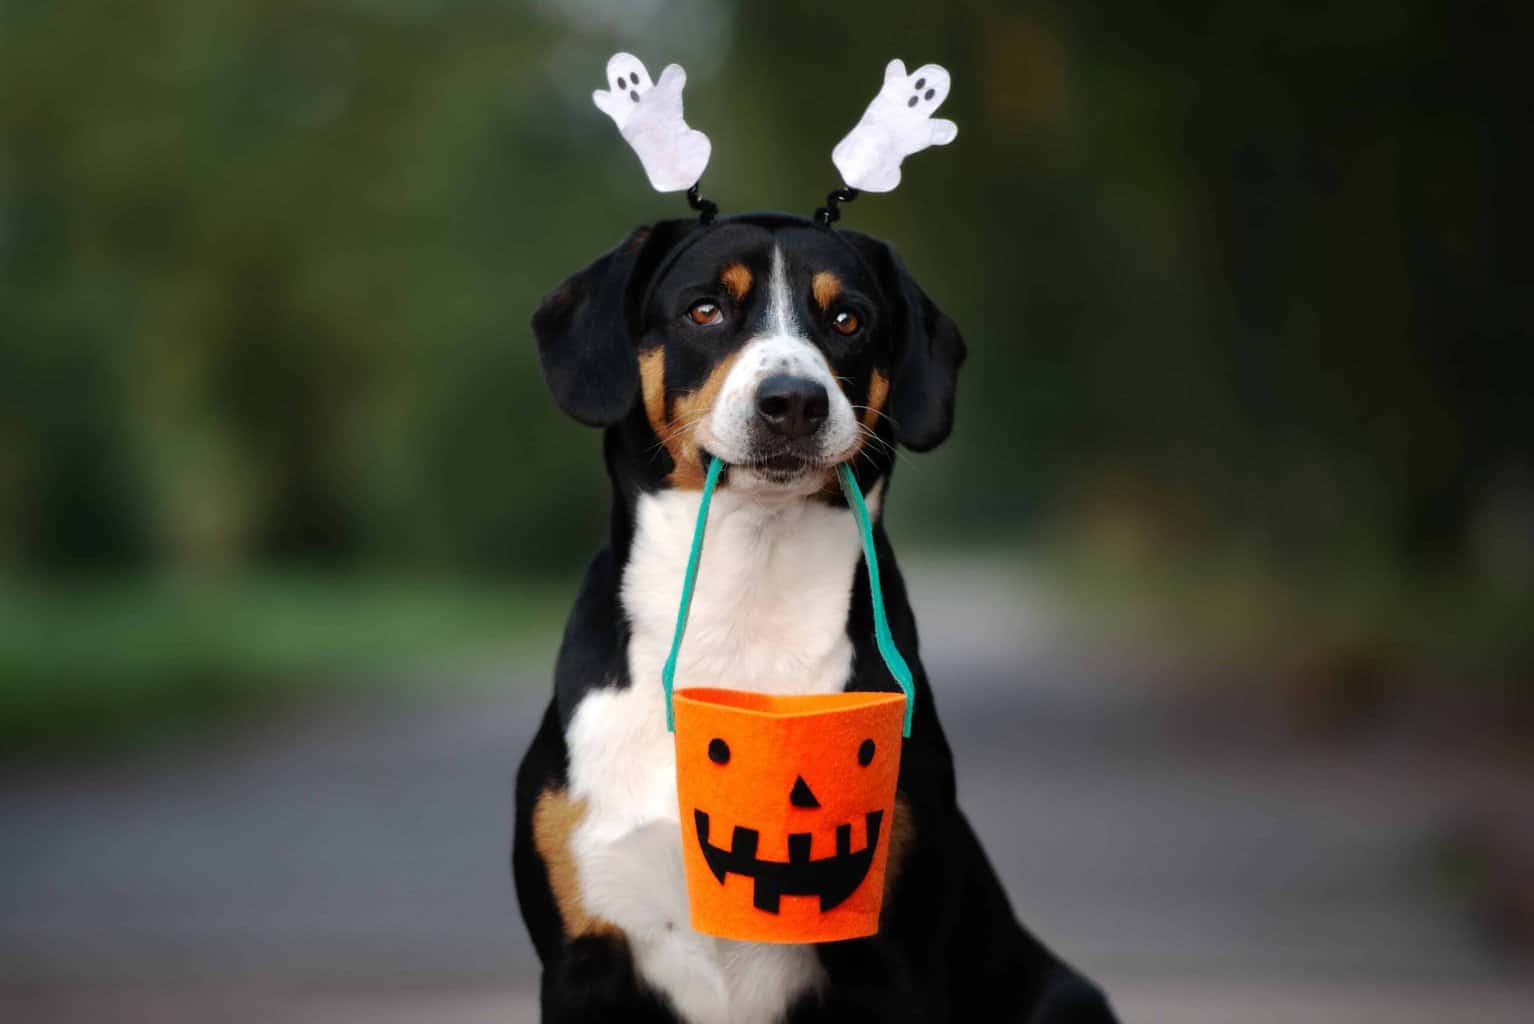 Happy dog holds trick-or-treat bucket. Halloween dog safety tips: Keep candy, decorations out of reach. Keep all pets inside, away from danger or anyone seeking to cause trouble on Halloween.